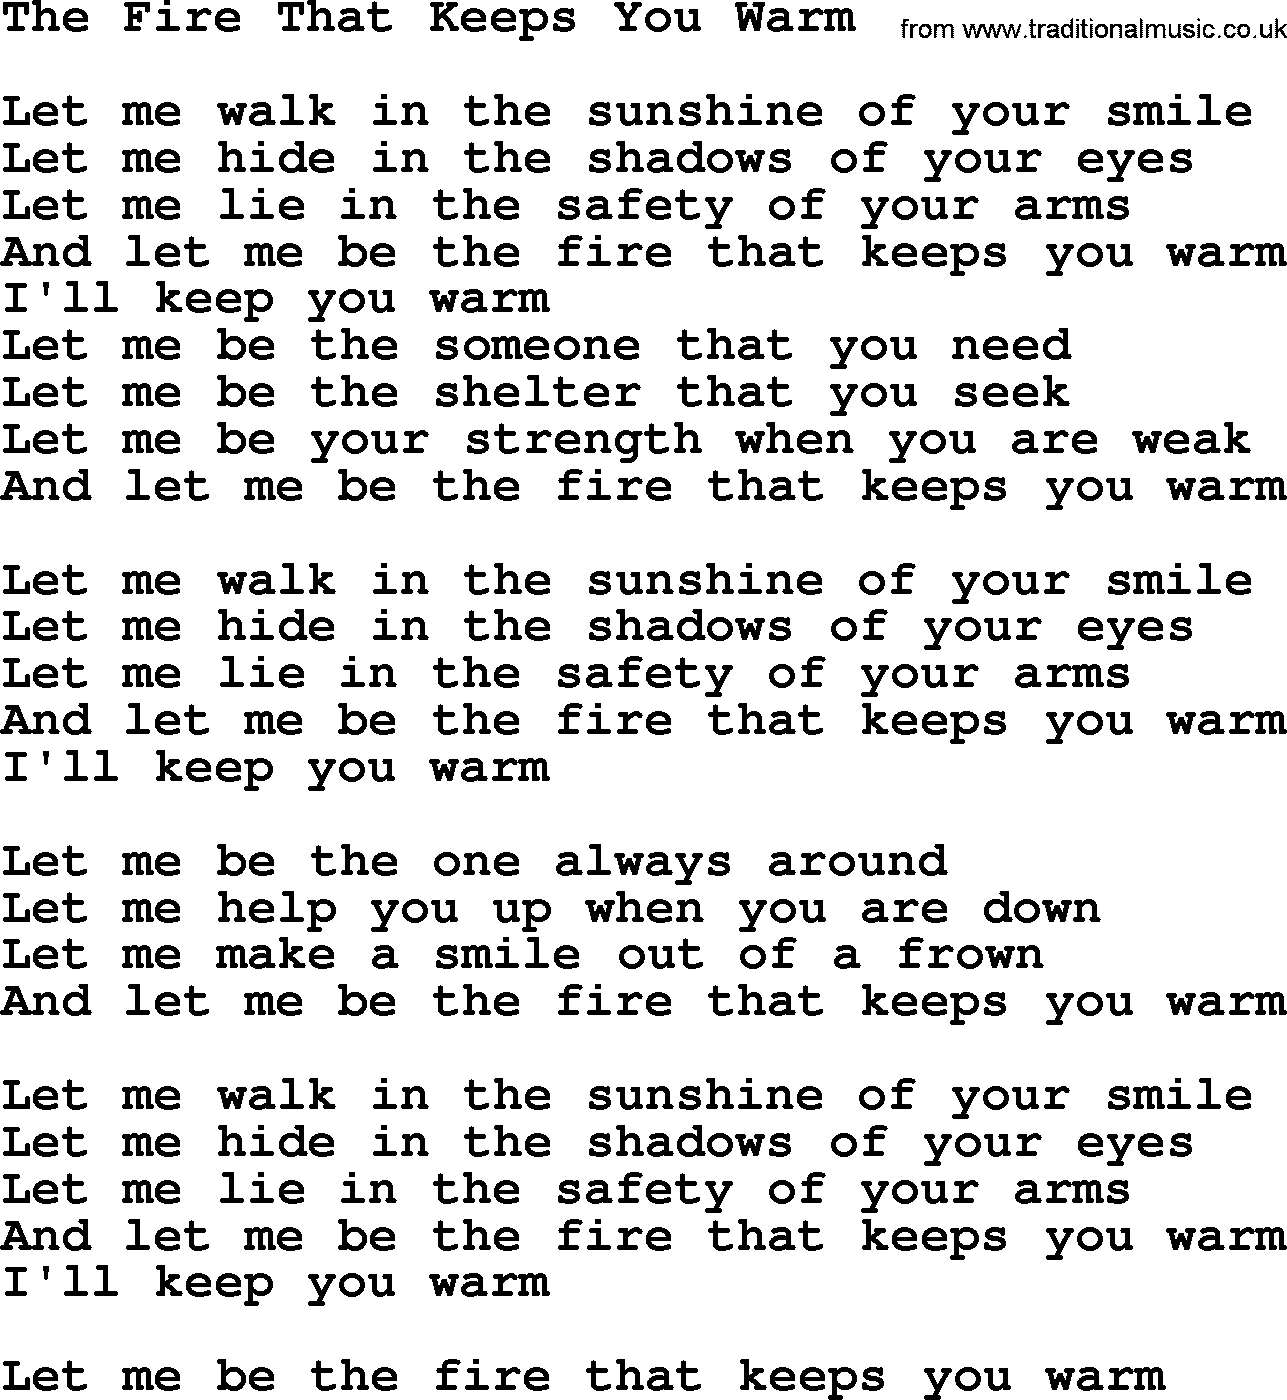 Dolly Parton song The Fire That Keeps You Warm.txt lyrics